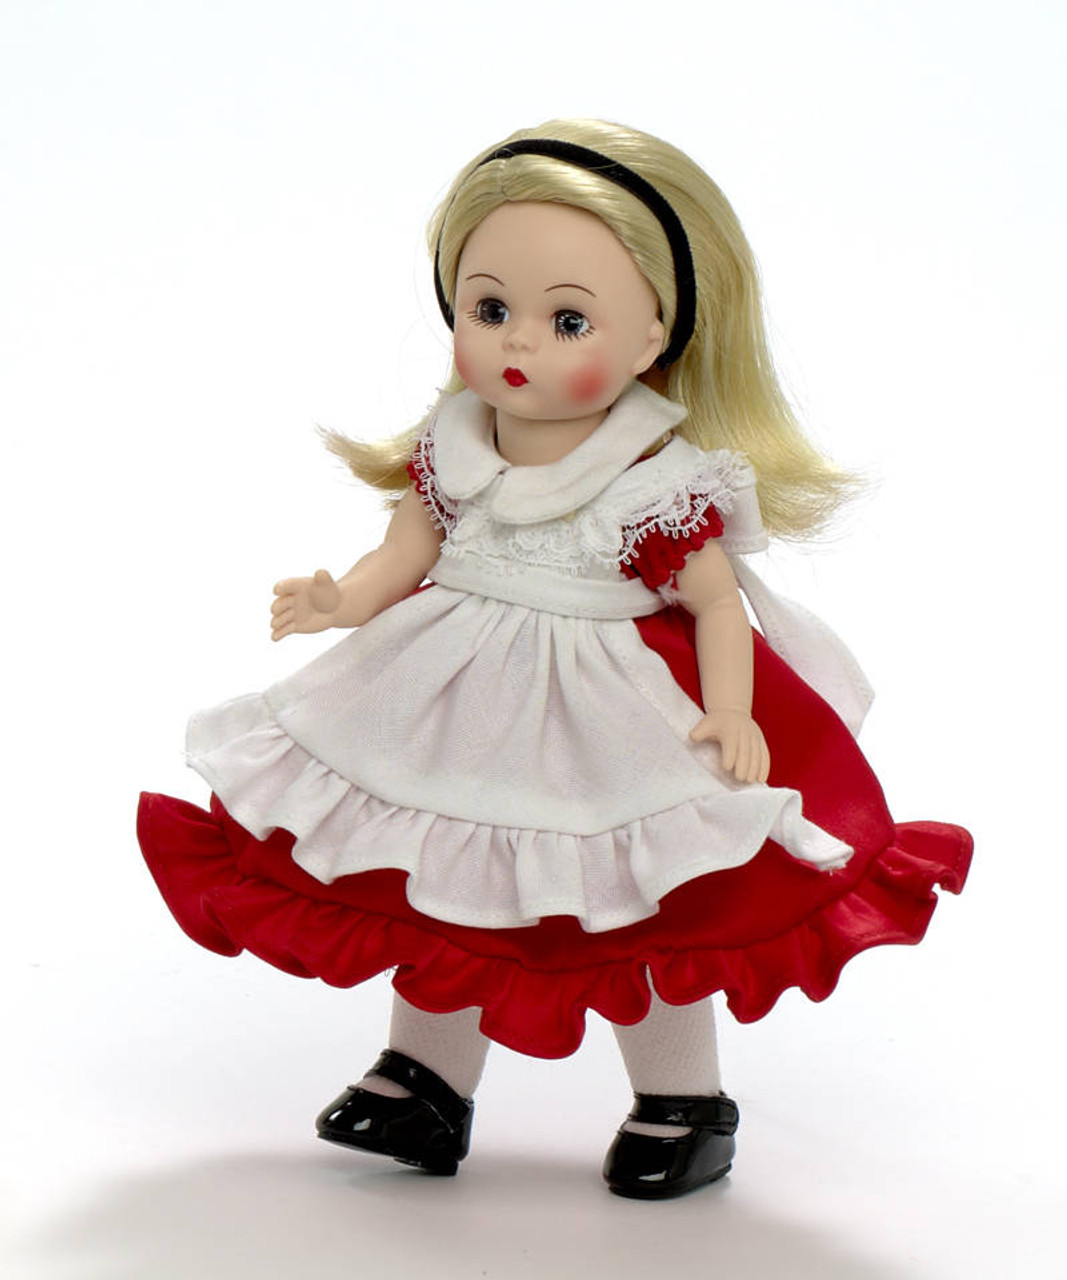 Madame Alexander Alice In Her Red Dress Doll - Madame Alexander Doll, Alice in Wonderland Doll, Madame Alexander, Alice Doll, Alice